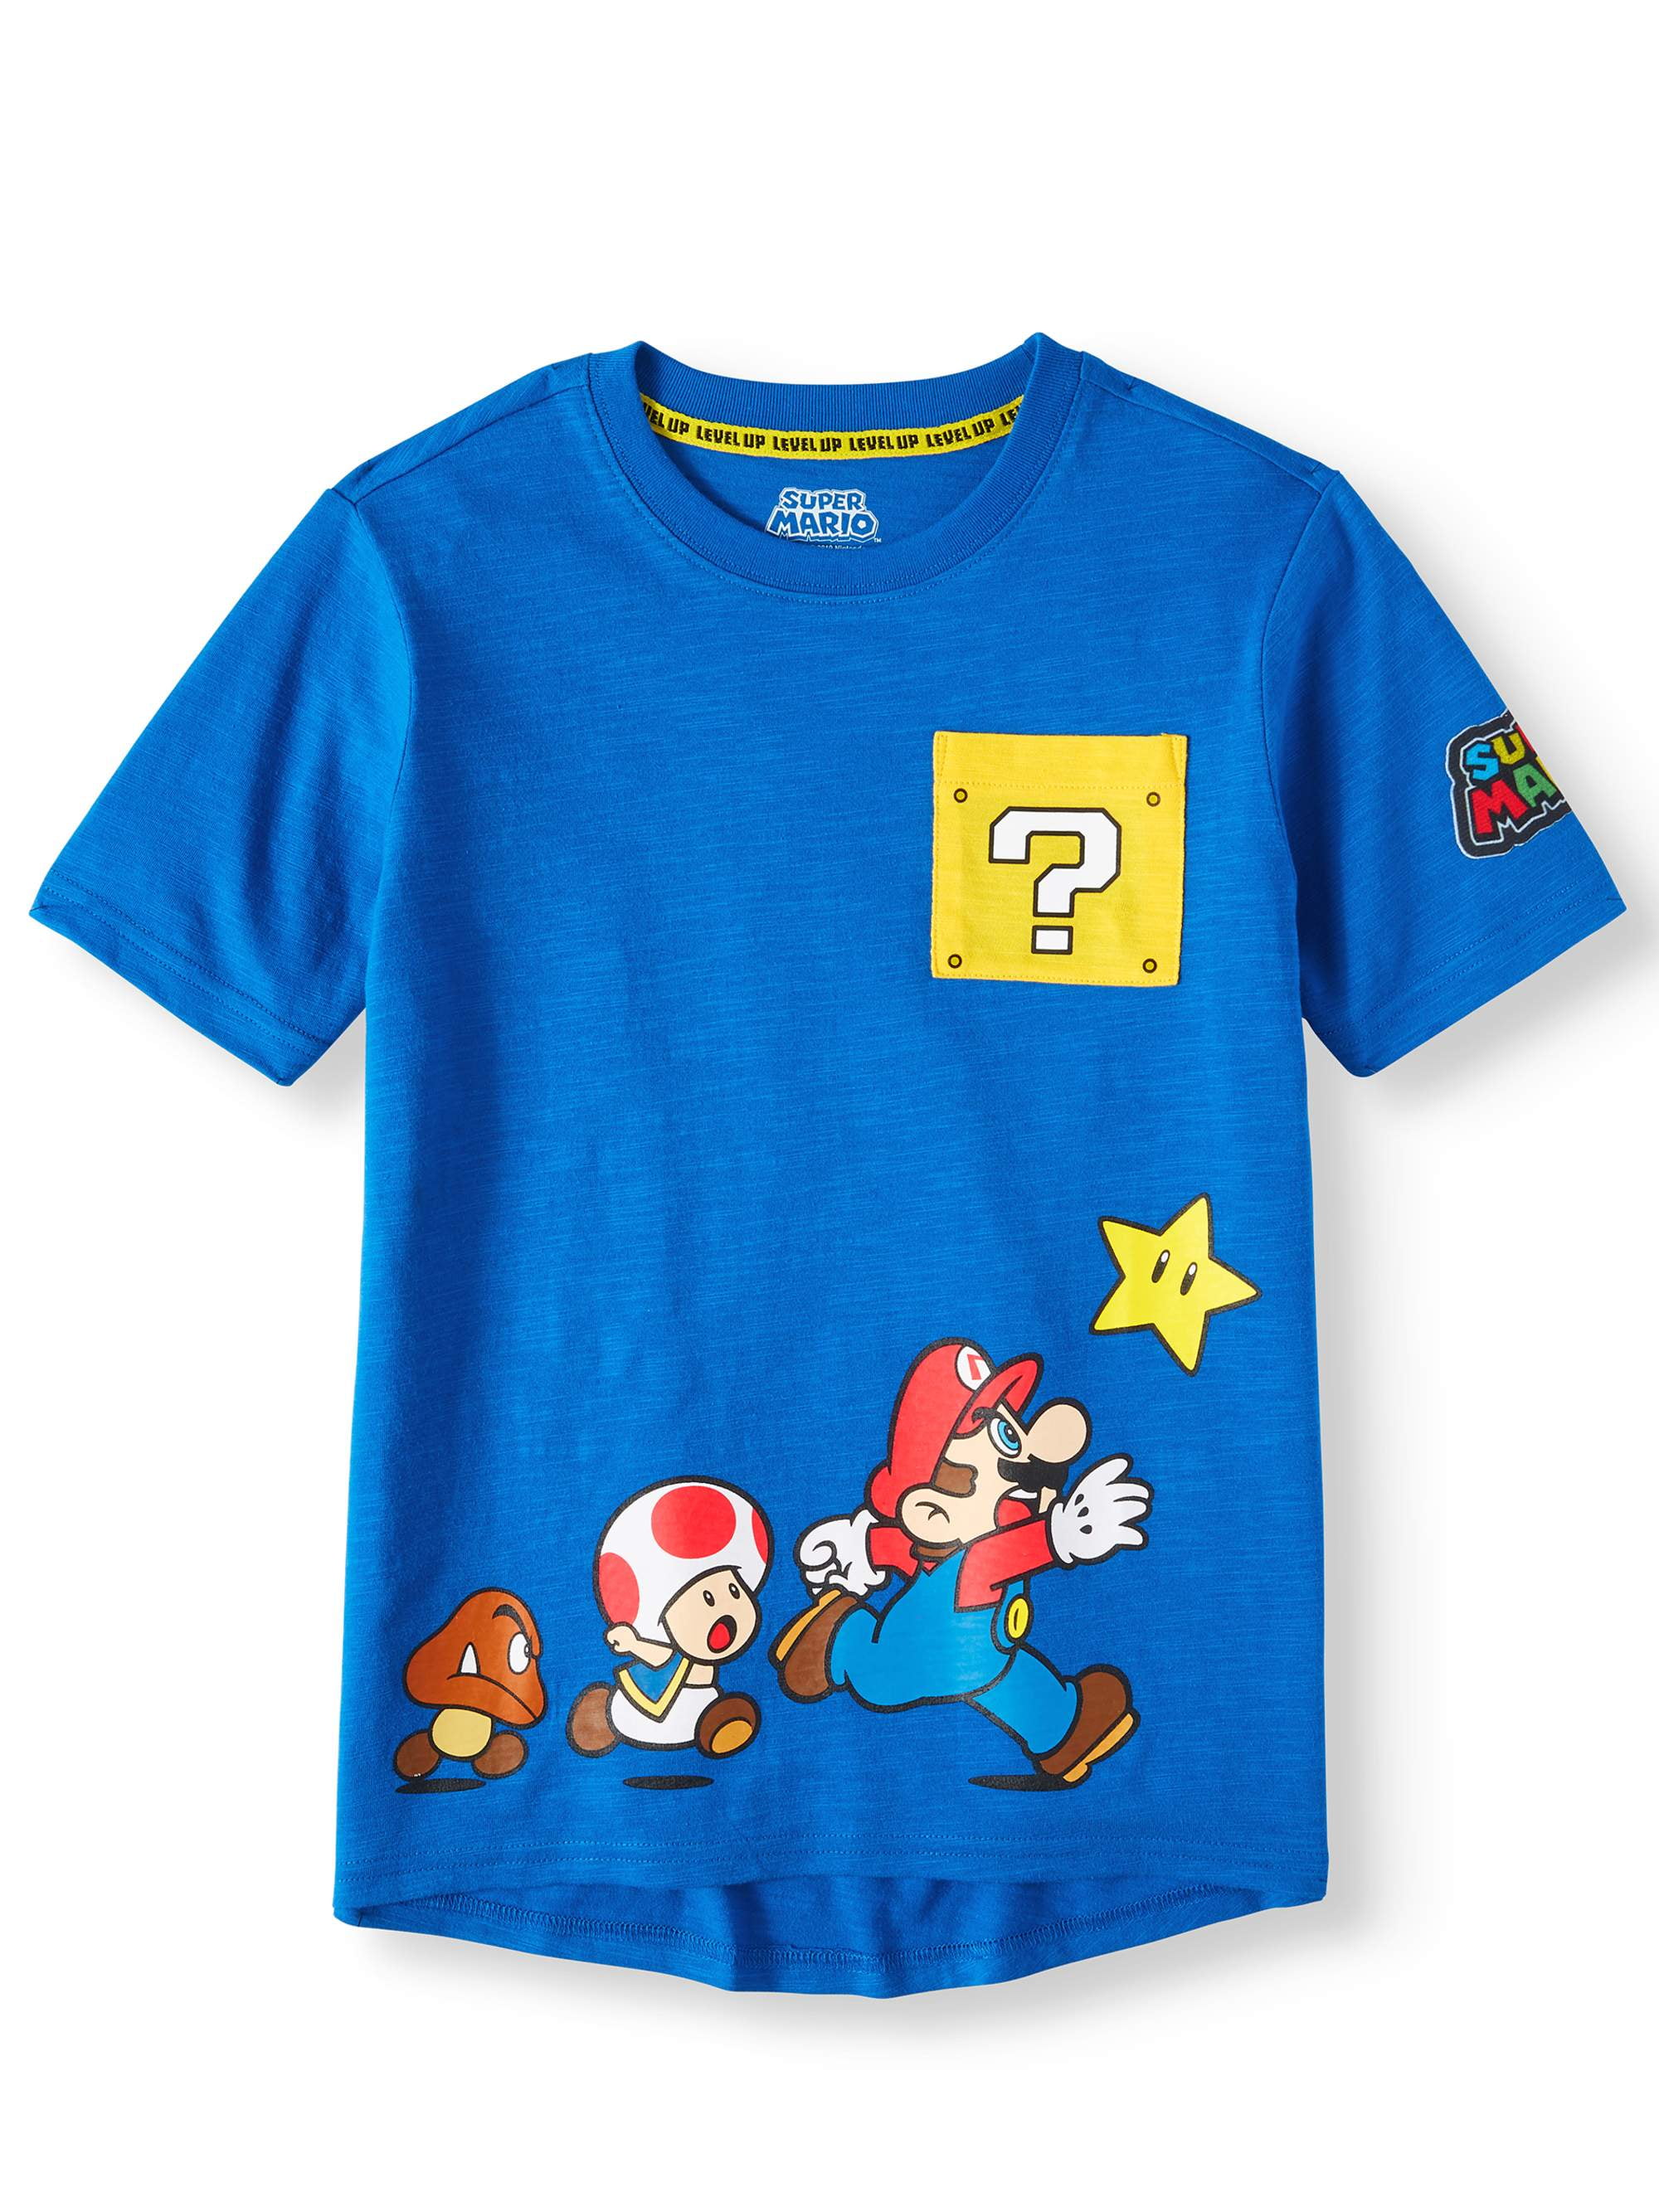 Ages 5-15 Official Merchandise 1980s Classic Video Game Crew Neck Graphic Tee Birthday Gift Idea for Boys Super Mario Character Tiles Boys T-Shirt